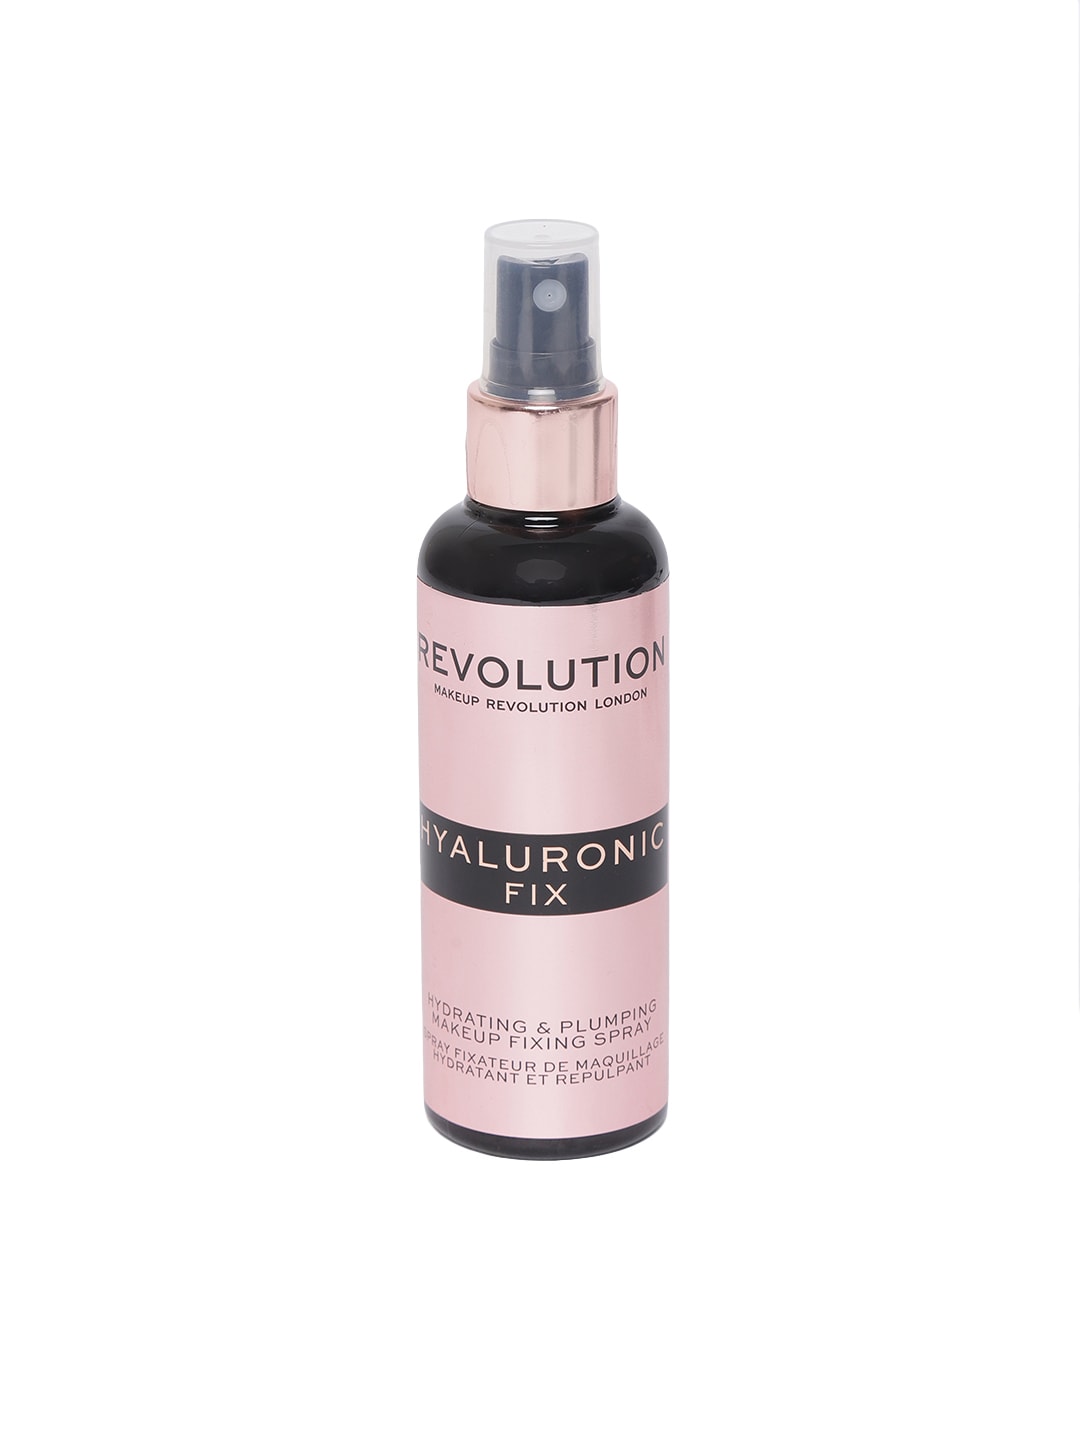 Makeup Revolution Hyaluronic Fixing Spray 100ml Price in India